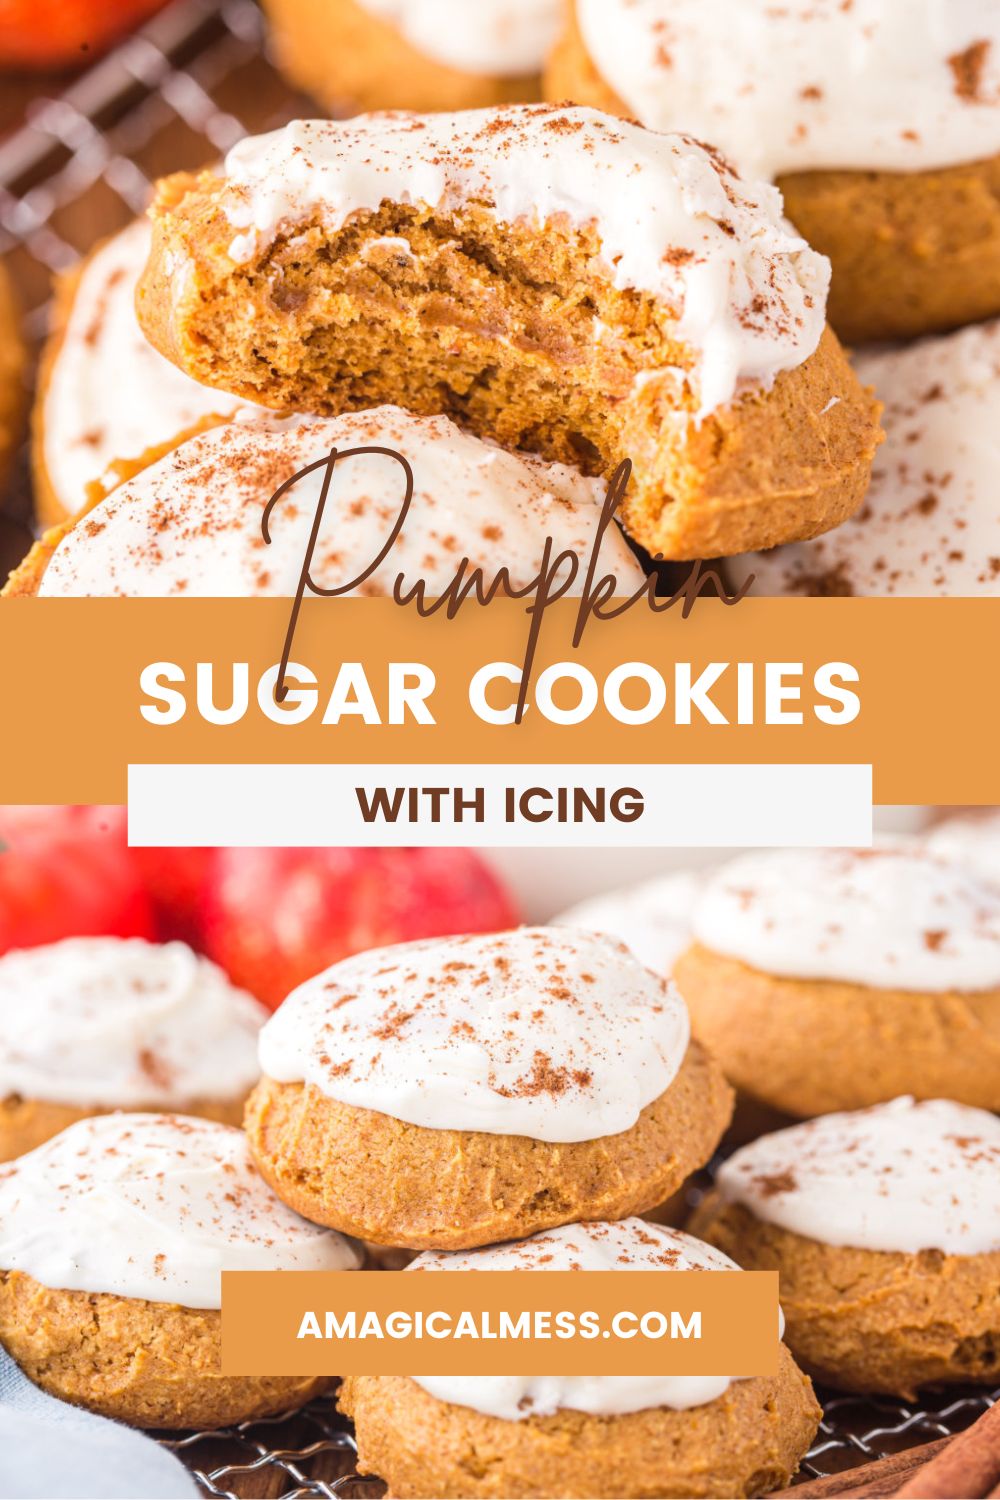 Pumpkin sugar cookies with icing in a pile.